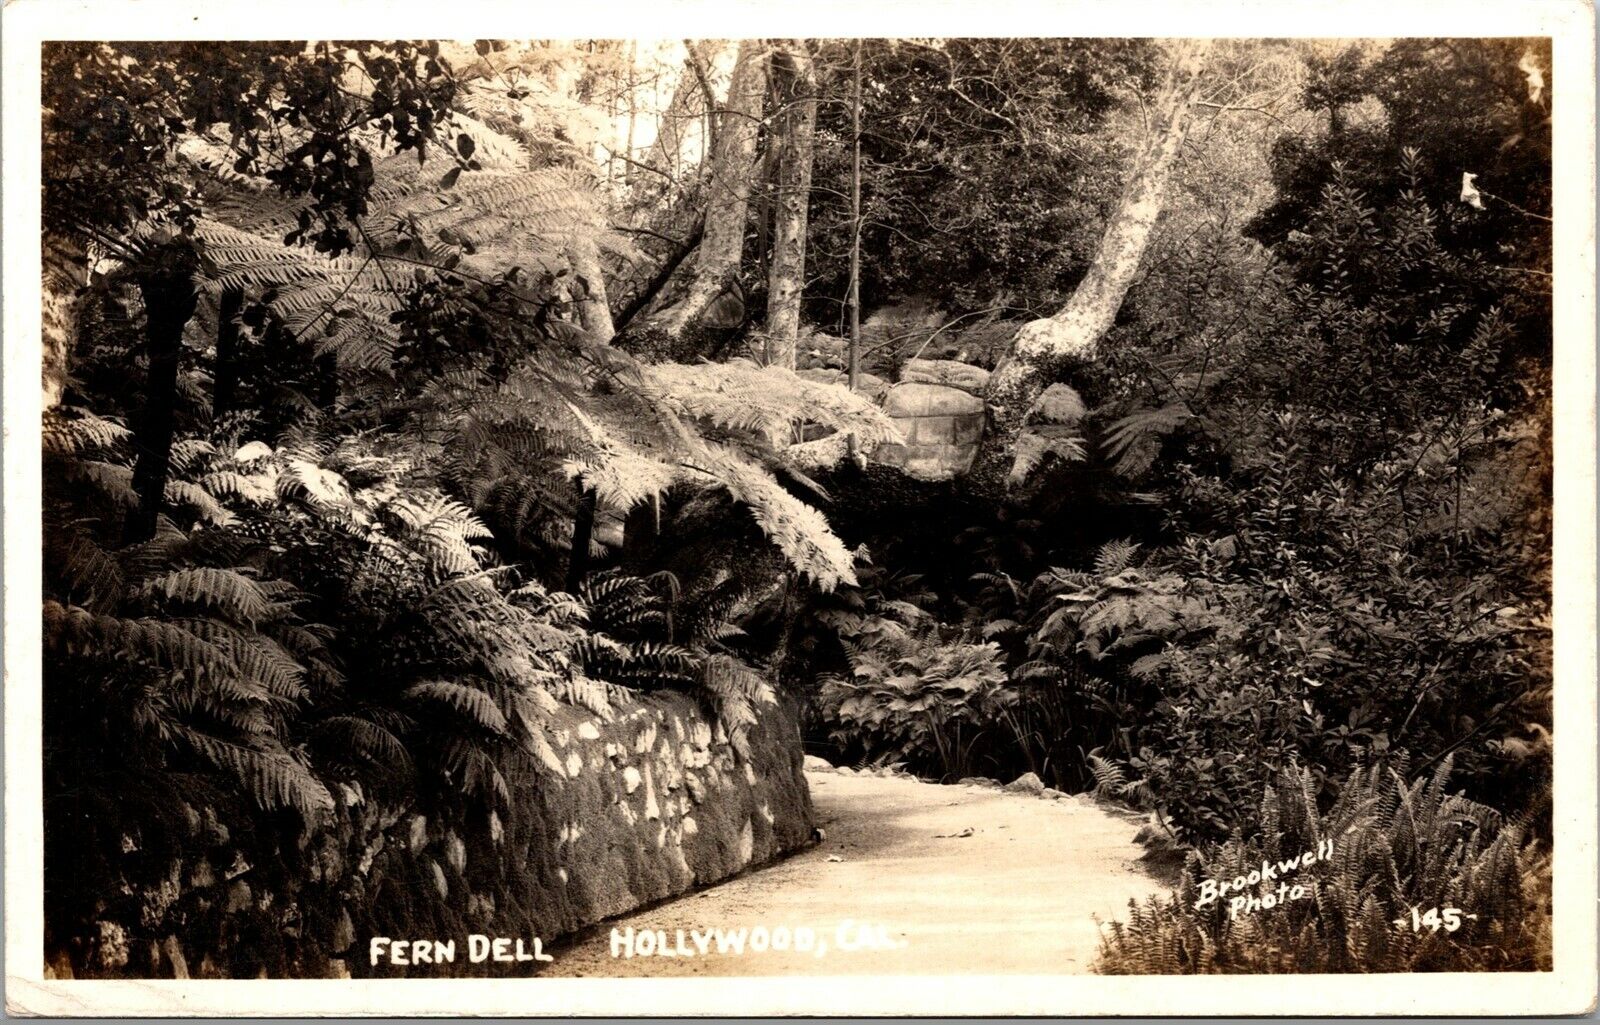 Vtg Fern Dell Trail Griffith Park Hollywood CA 1940s RPPC Brookwell Postcard